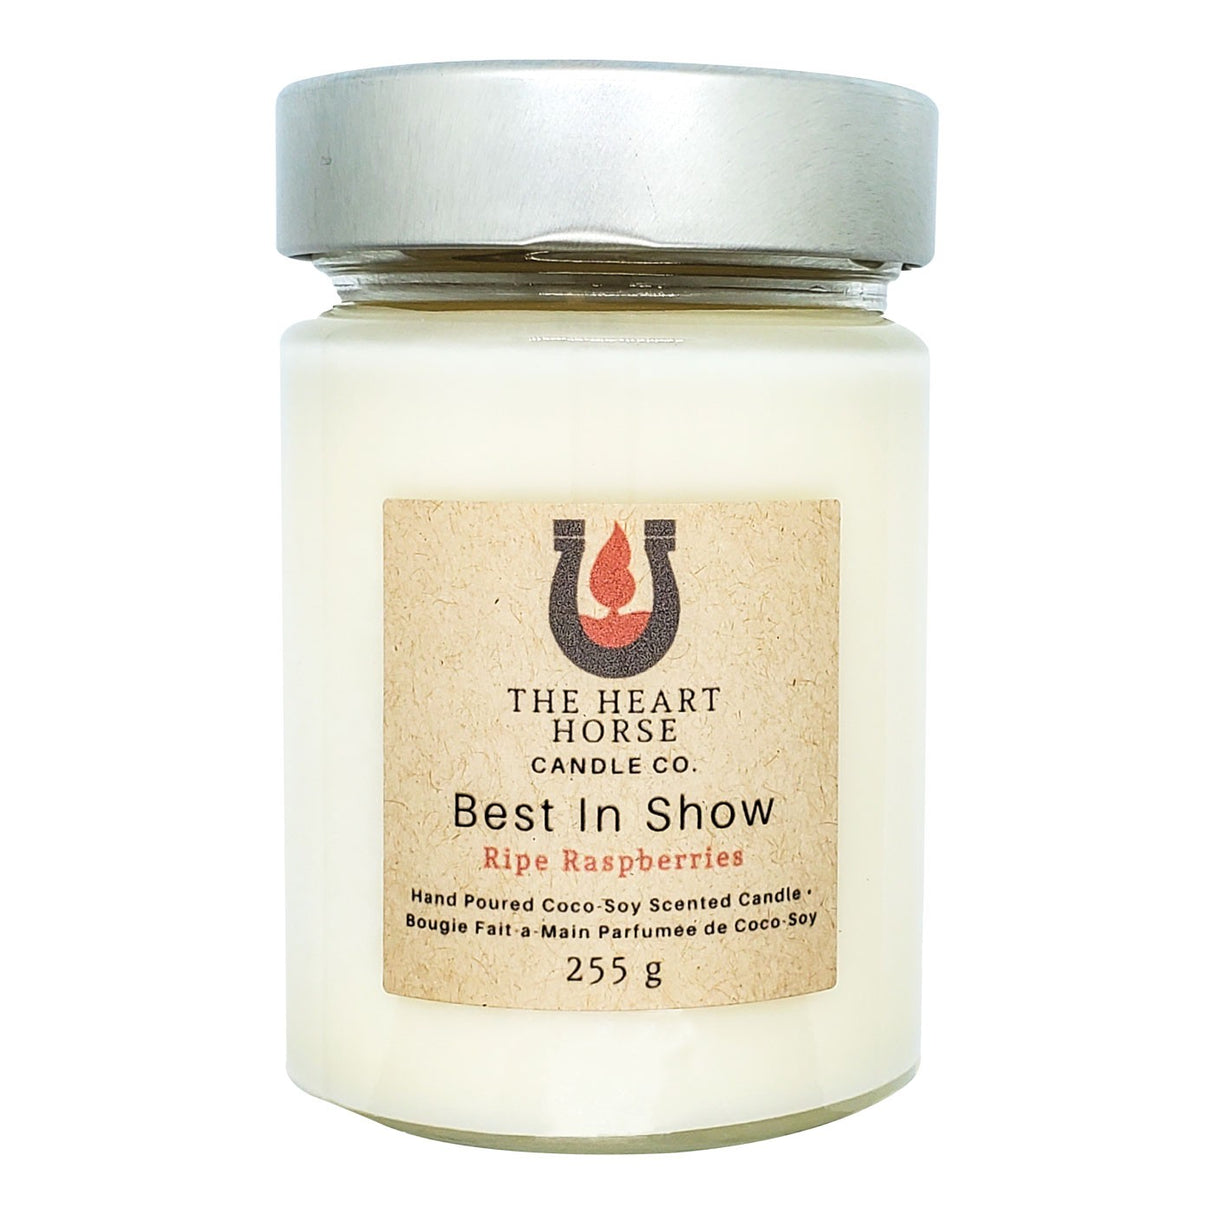 The Heart Horse Candle Co. Best In Show Candle